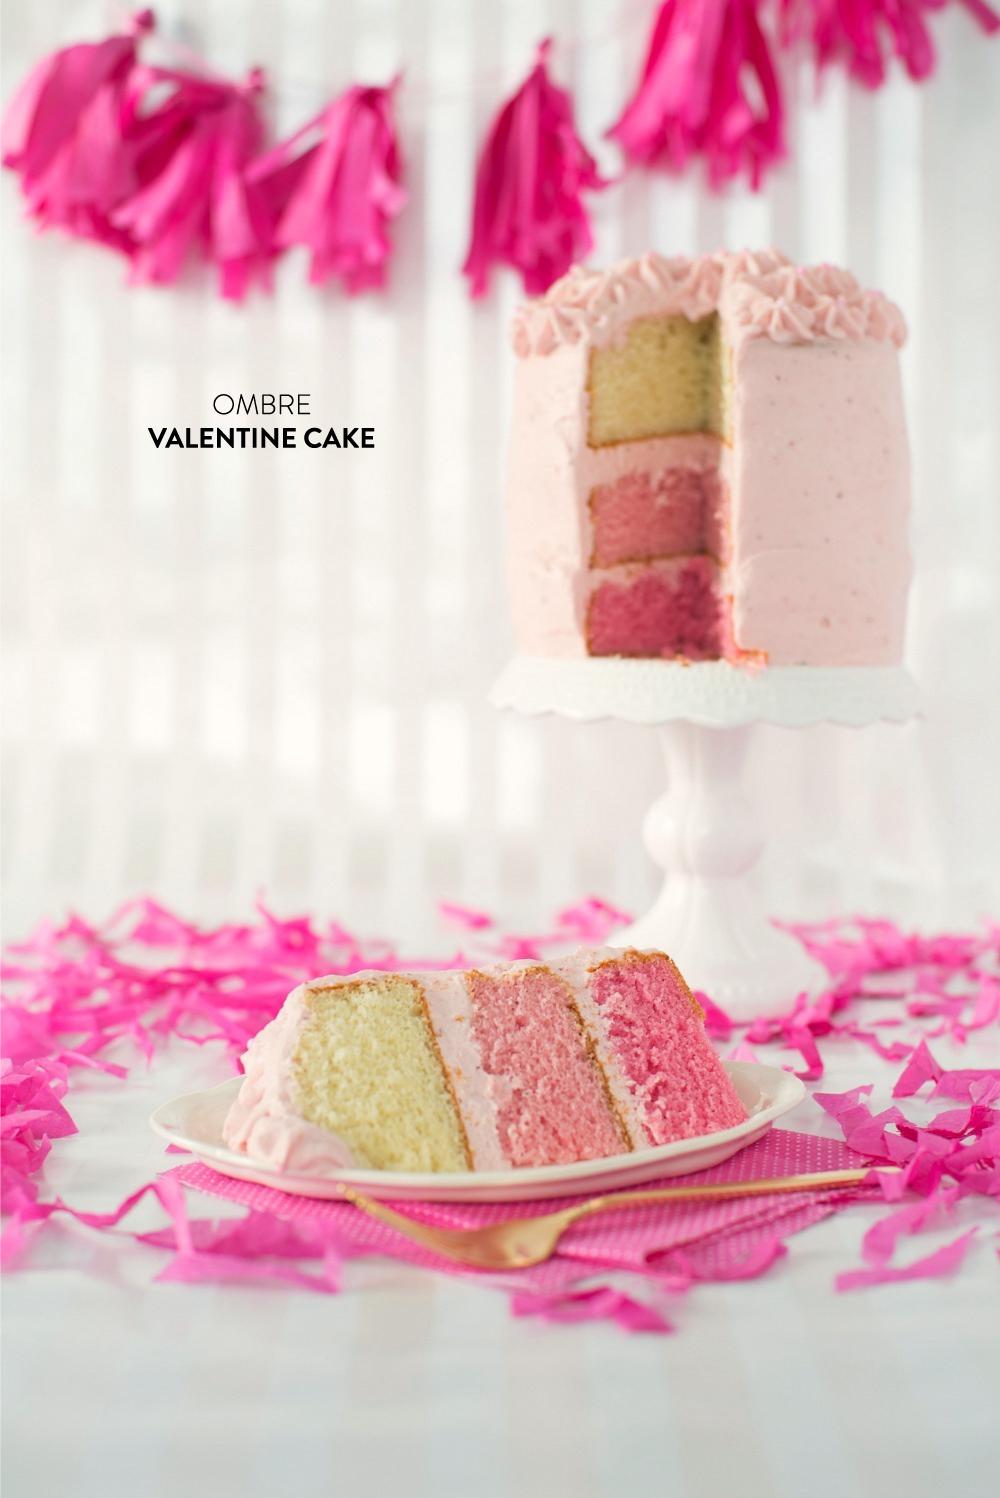 Pink Ombre Rose Cake